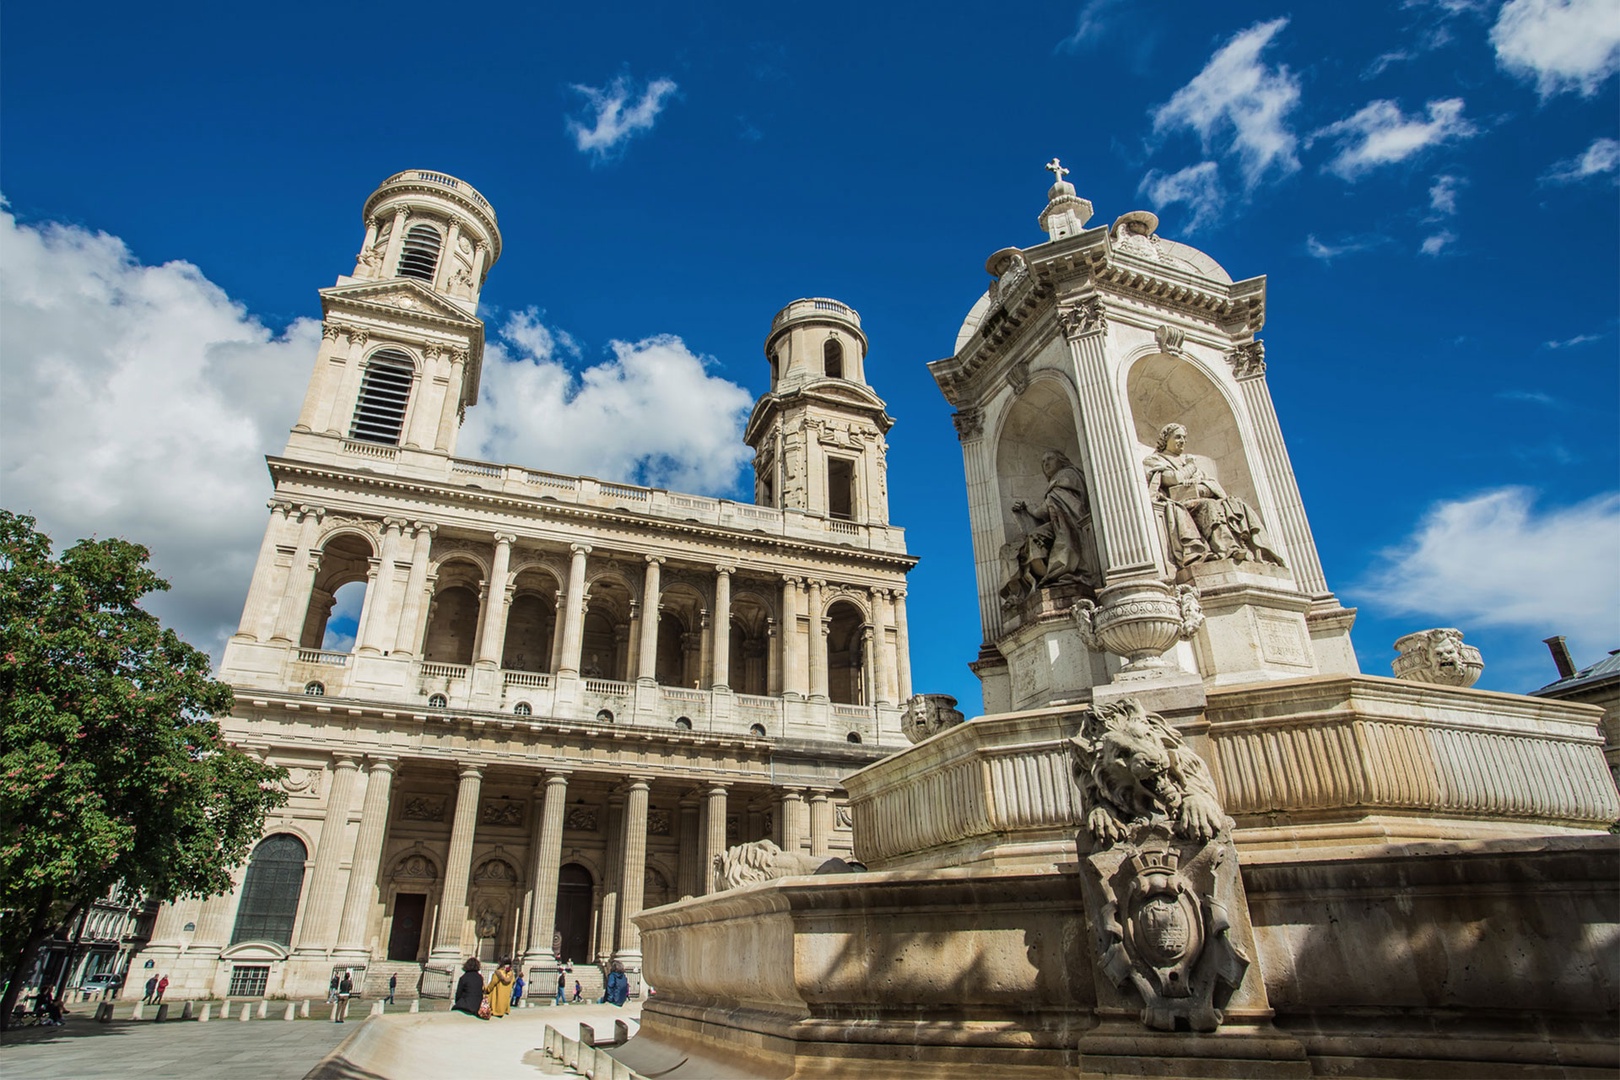 Visit the beautiful Saint-Sulpice church nearby.